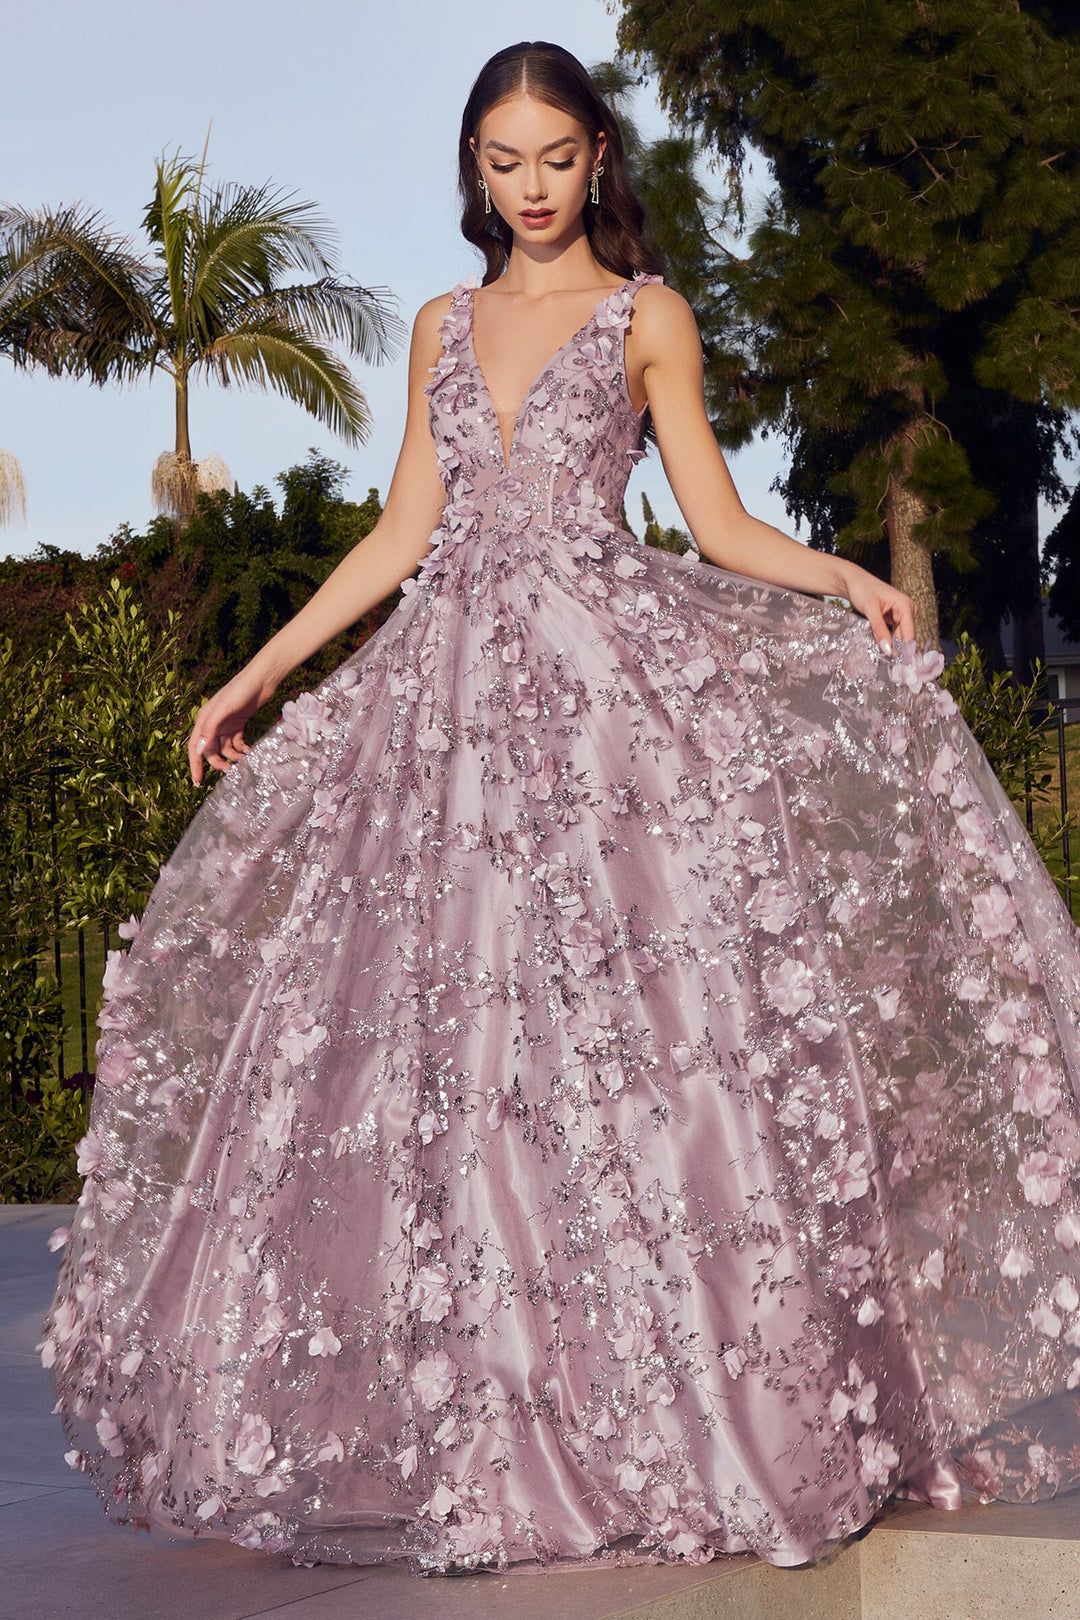 3D Floral Glitter Ball Gown by Ladivine J838